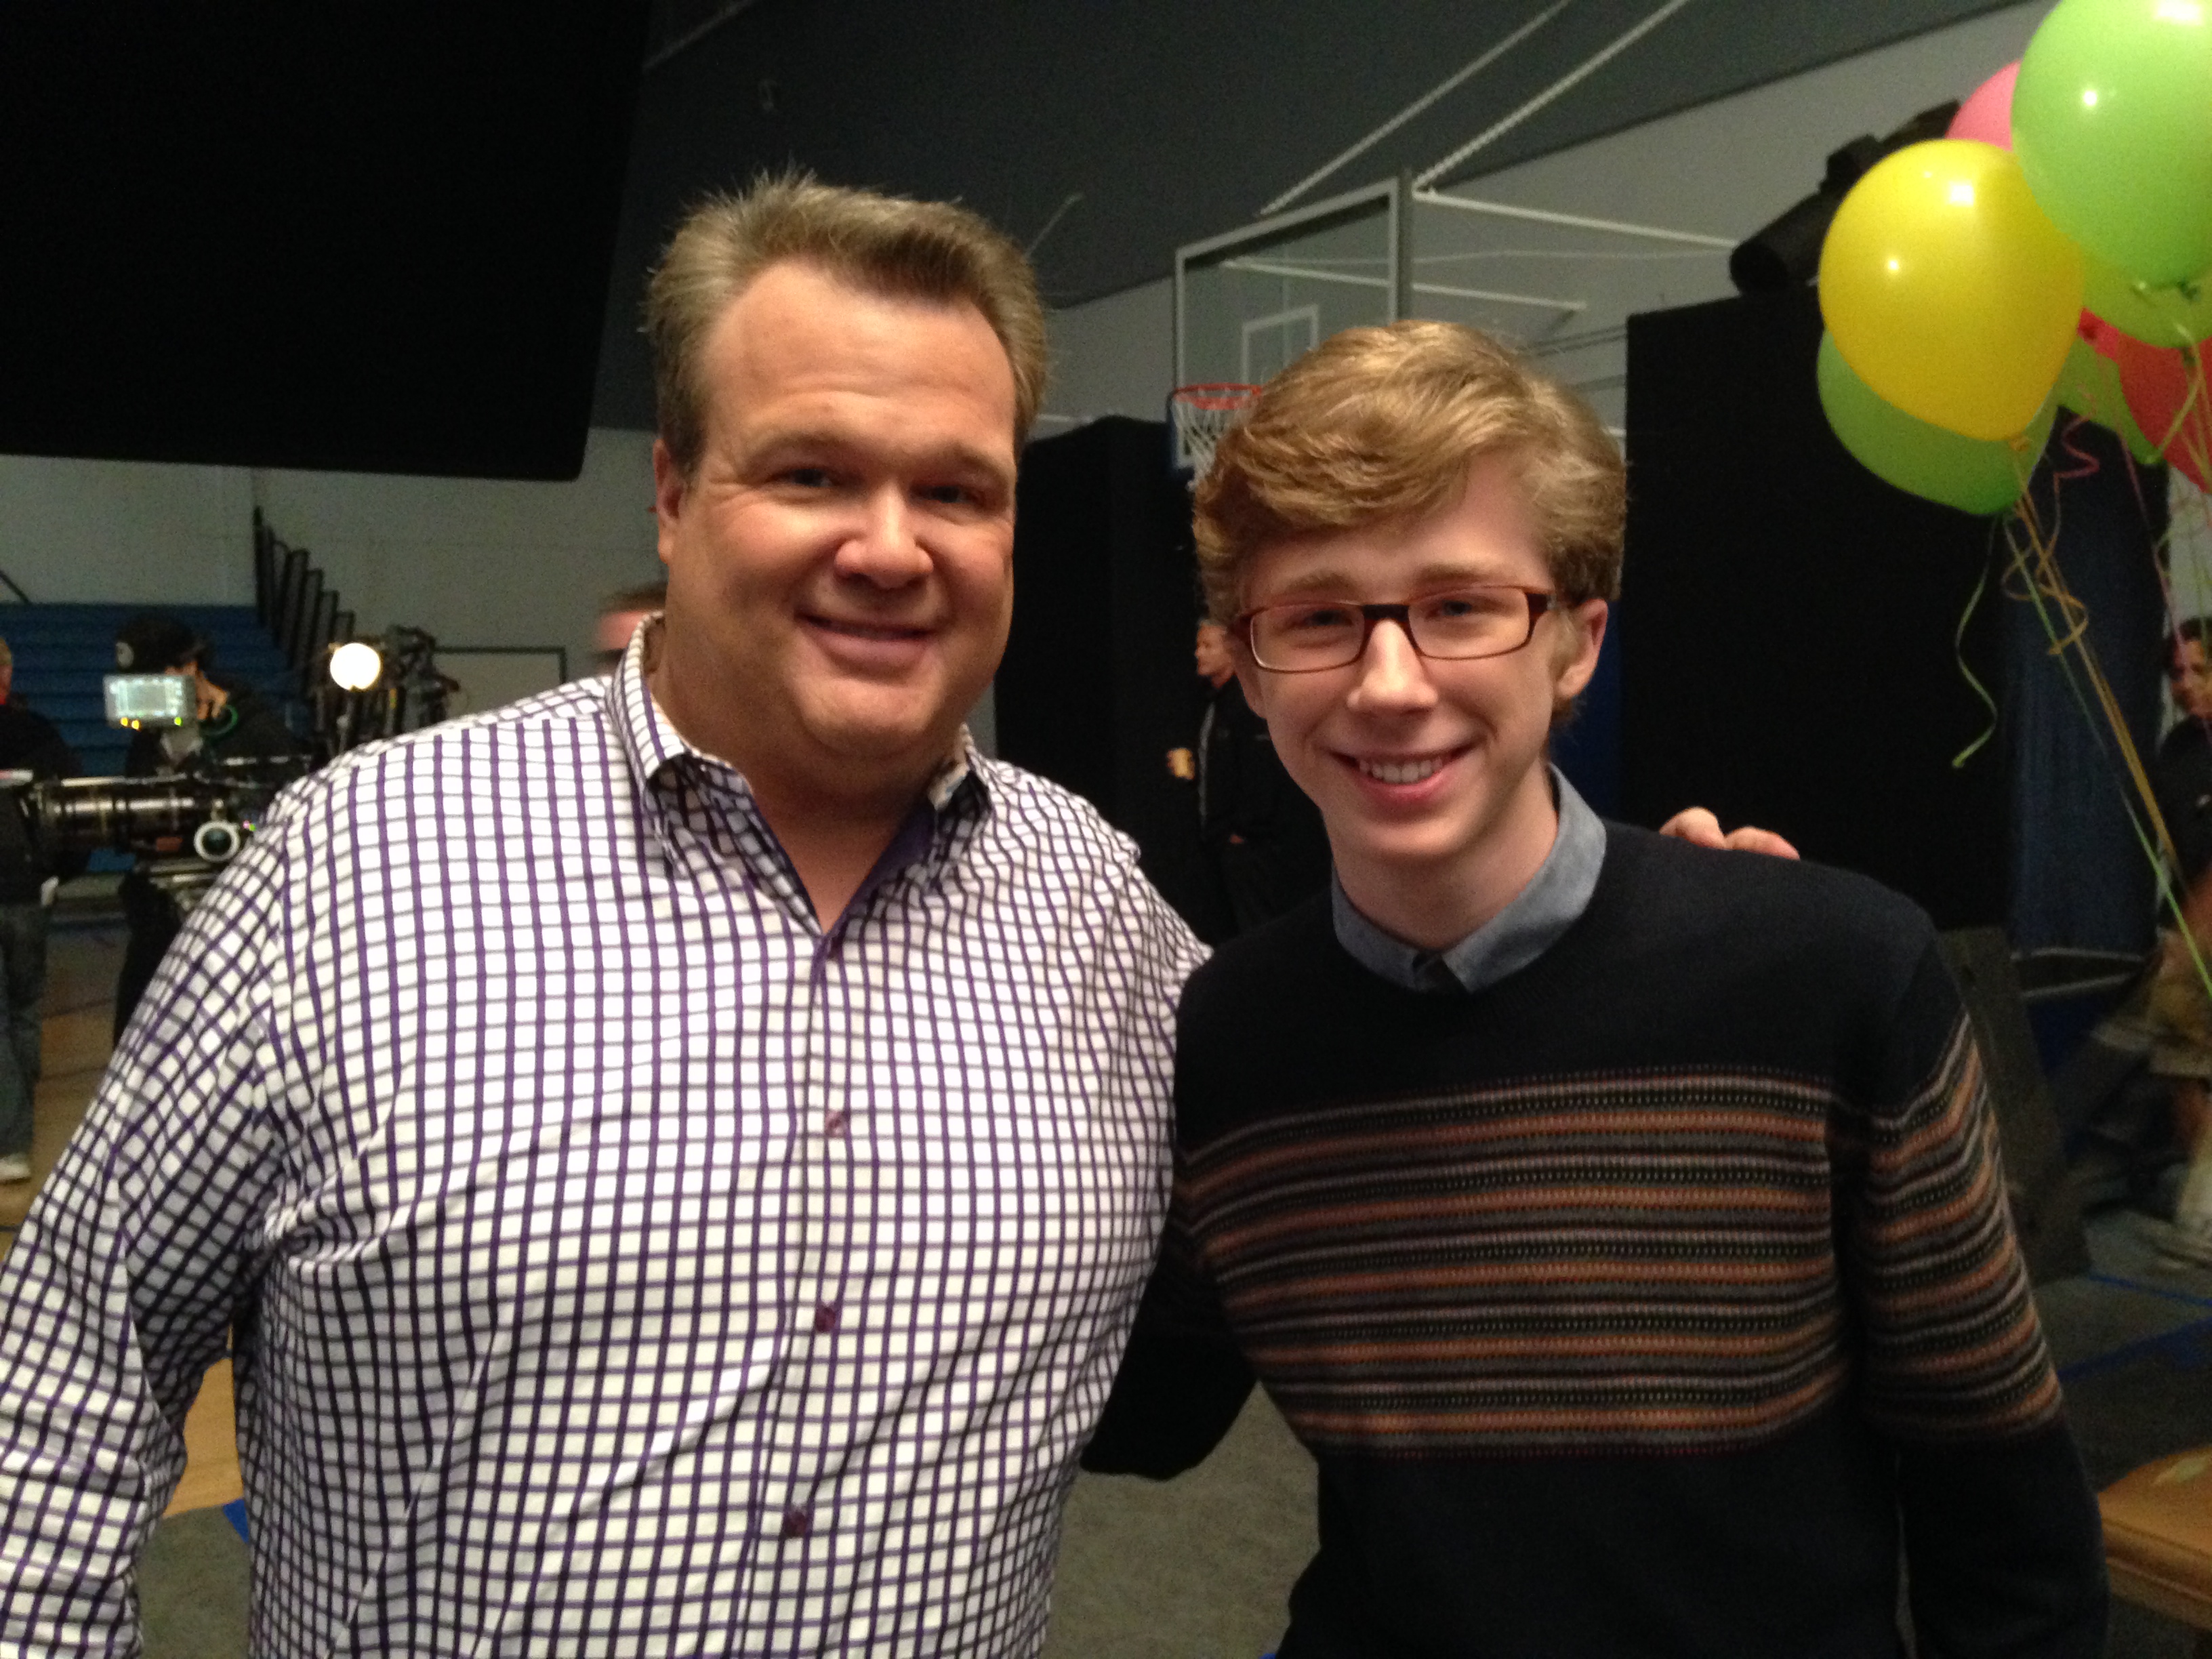 Eric Stonestreet and Joey Luthman on set of Modern Family in January 2014.